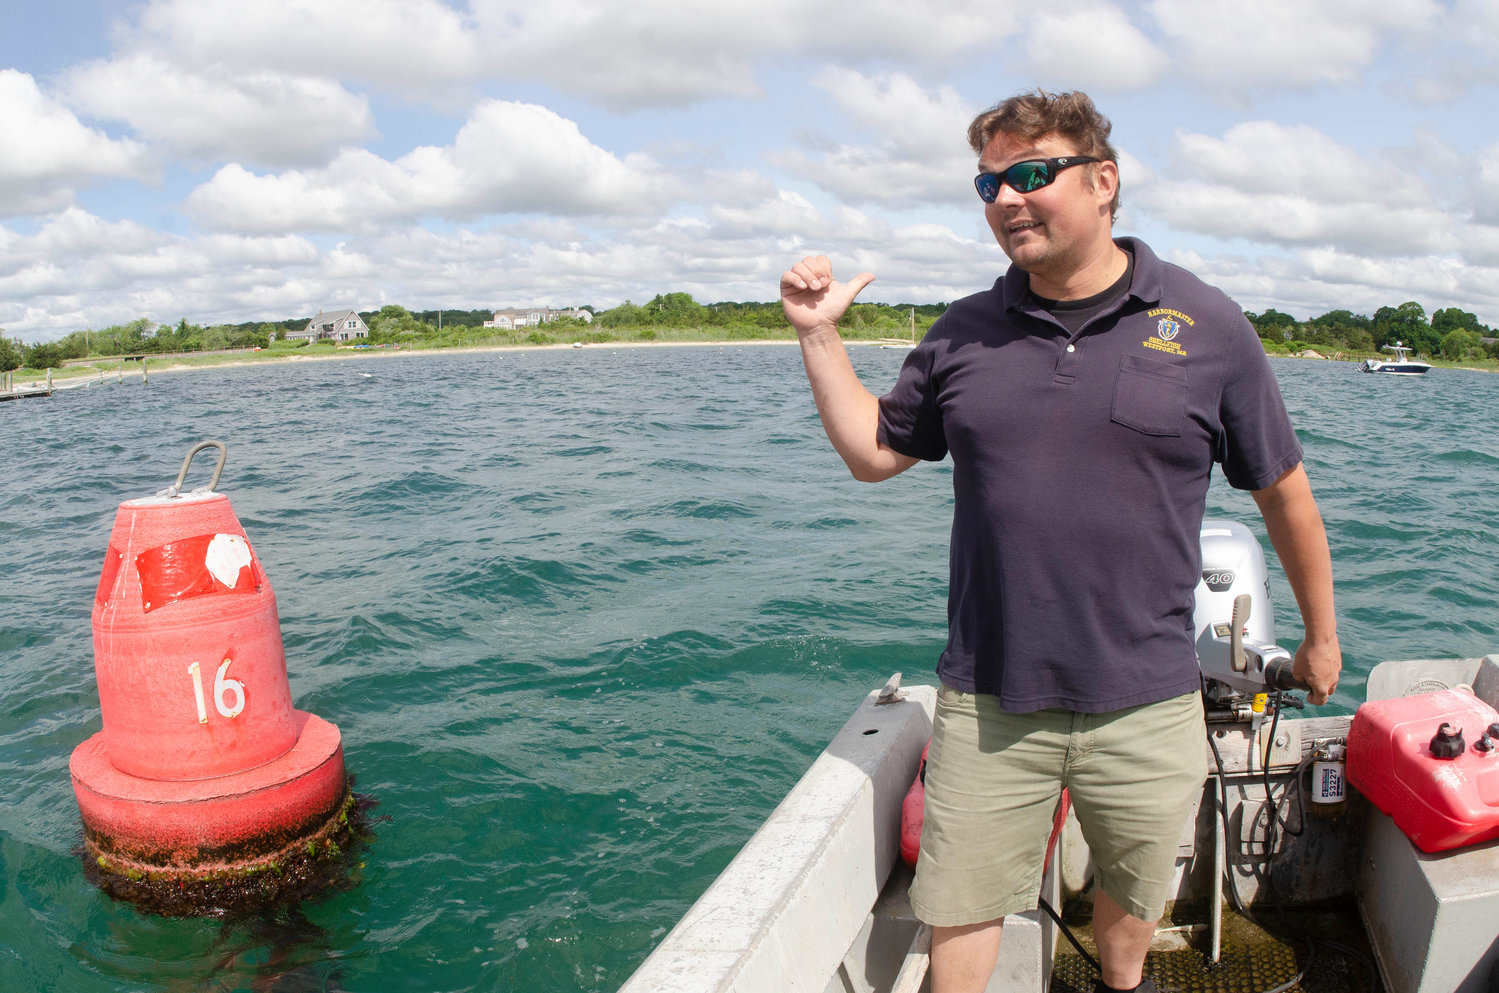 Chris Leonard, head of marine services for the Town of Westport, said the federal channel's shoaling needs to be addressed soon.